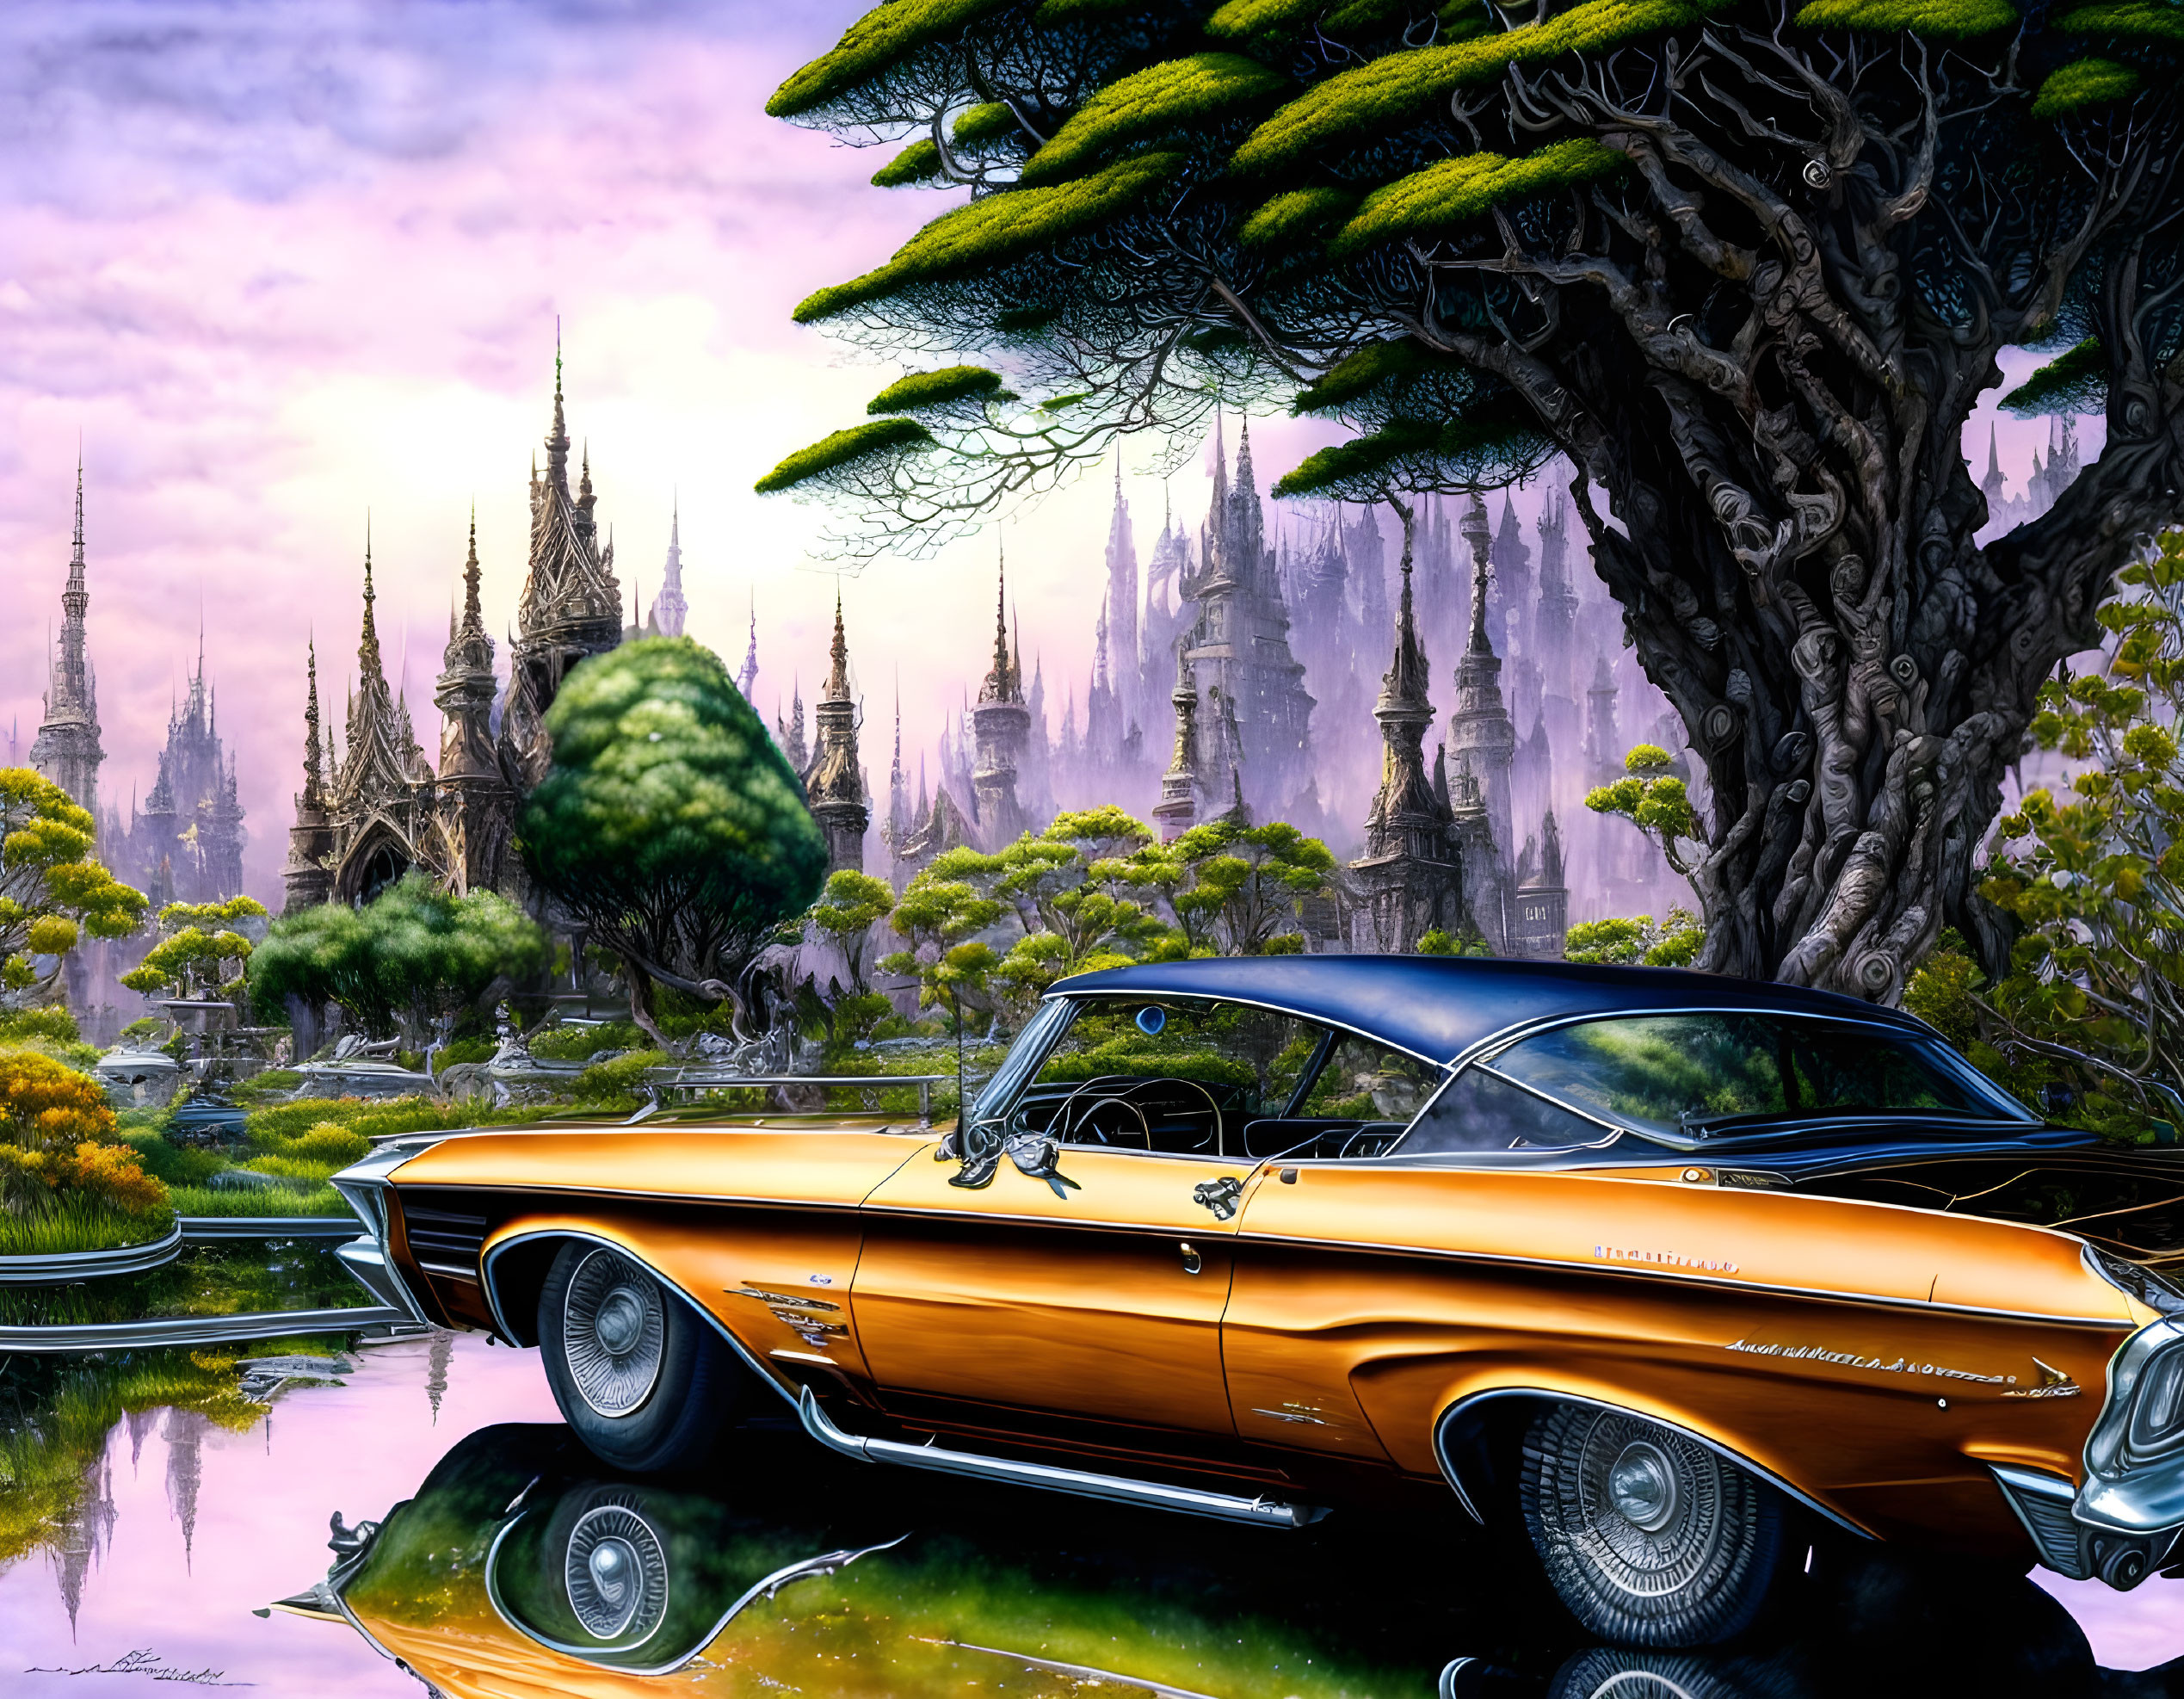 Orange Car Parked by Reflective Lake with Purple Castles and Pink Sky